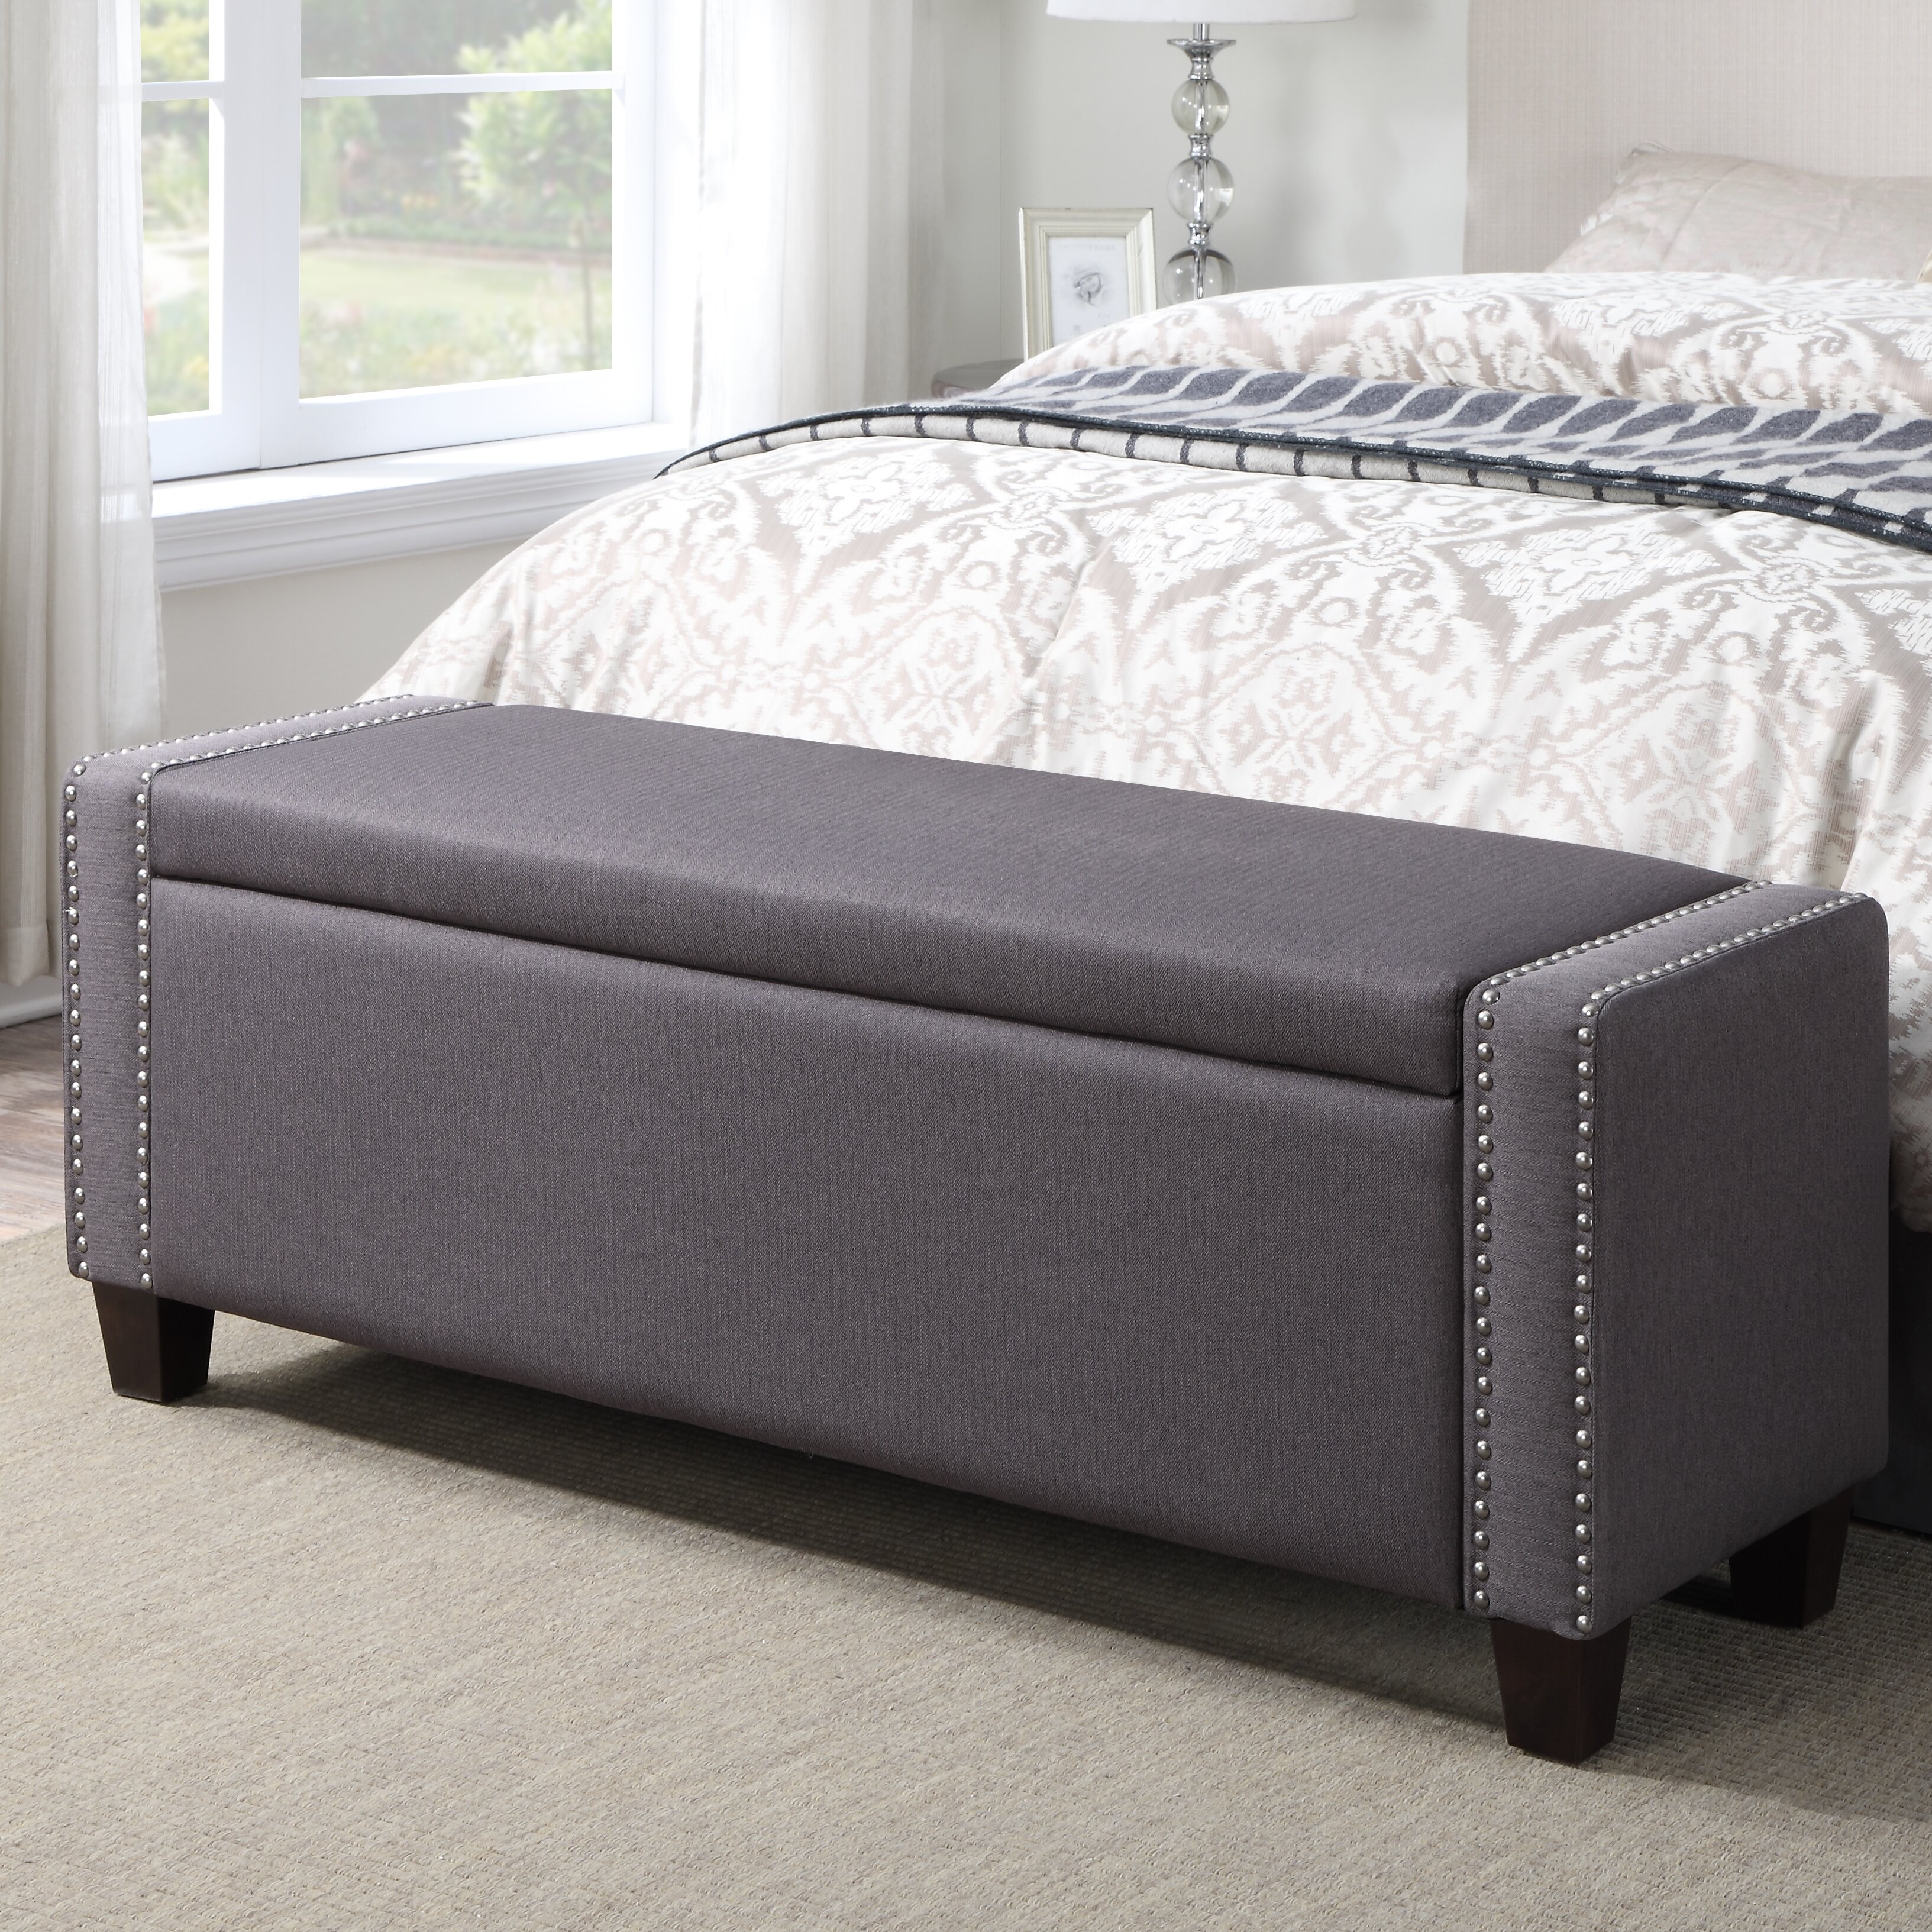 House of Hampton Gistel Upholstered Storage Bedroom Bench & Reviews ...